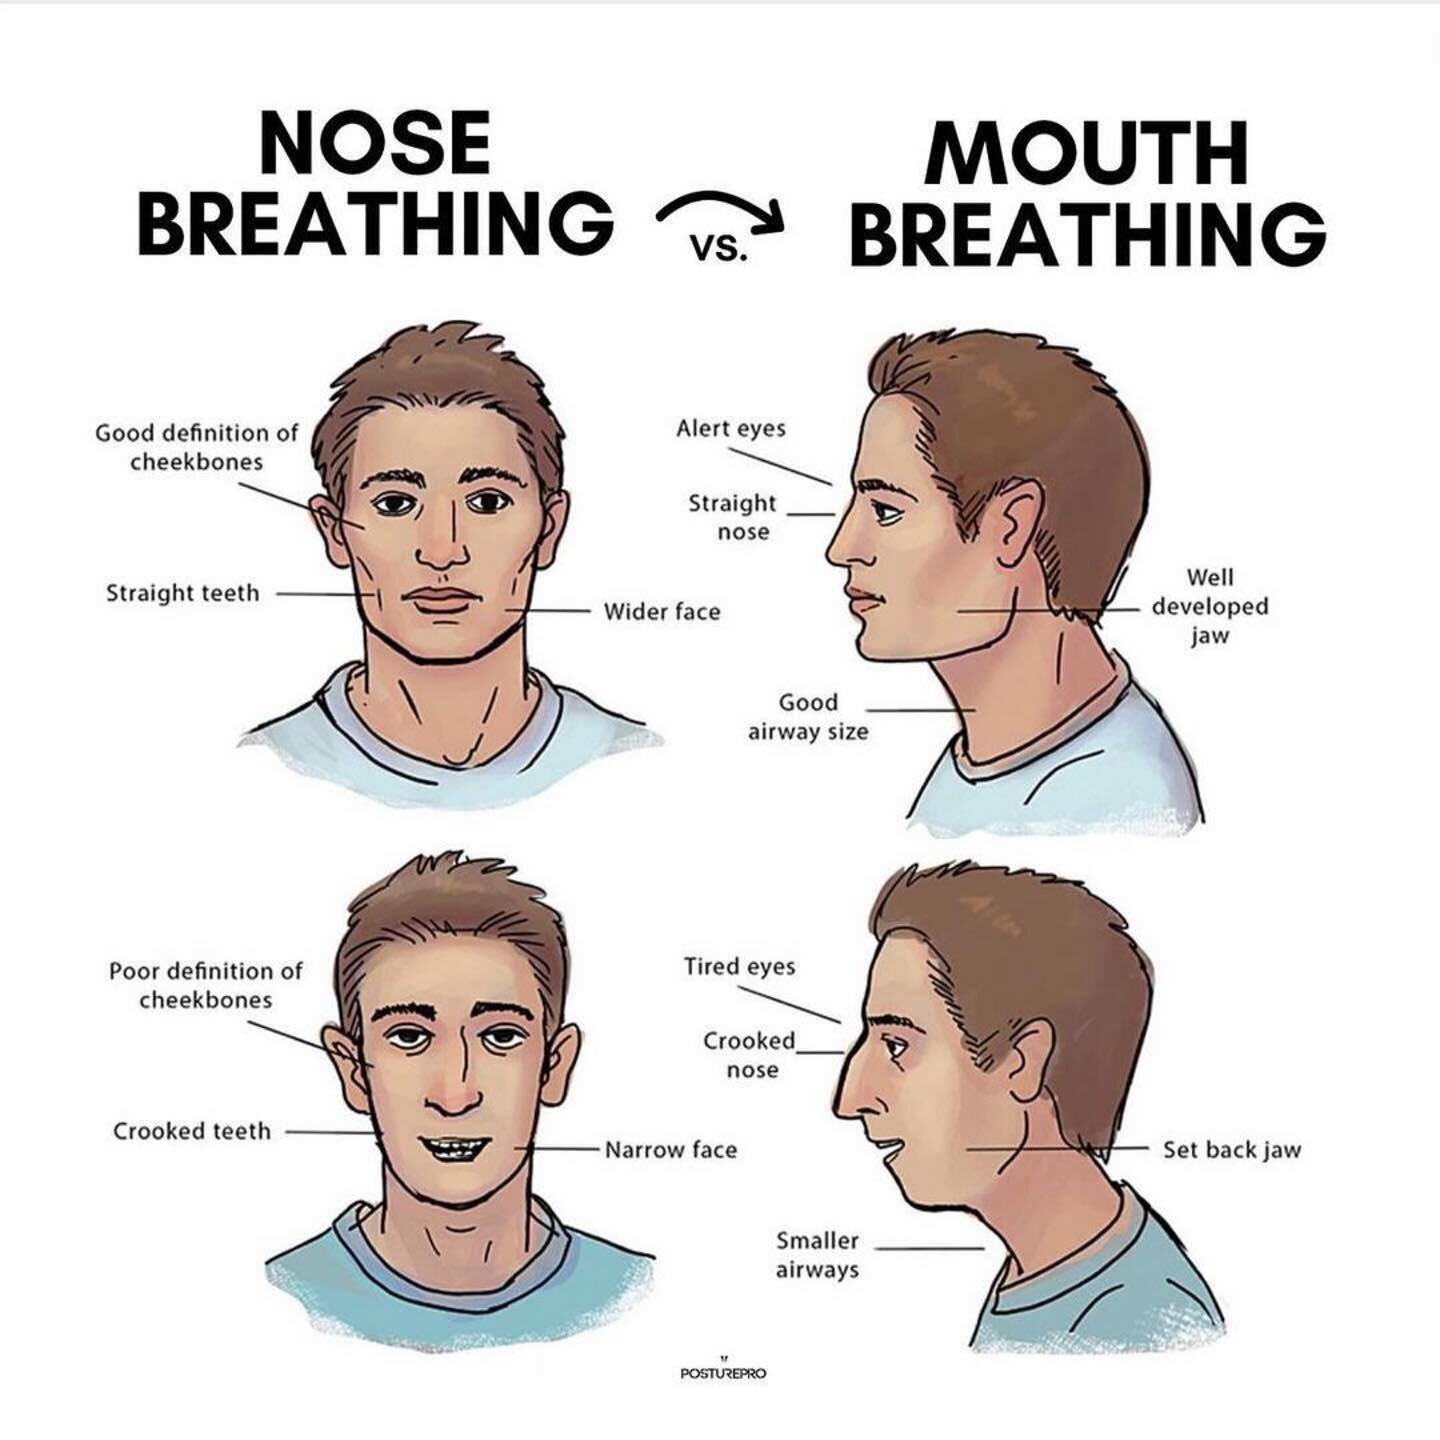 Ever wake up with a dry mouth? Then you might be a mouth breather?

But did you know that your mouth is not designed to be the main inhalation route for the body?

Mouth breathing is an inefficient way of optimizing respiration and delivering one of 